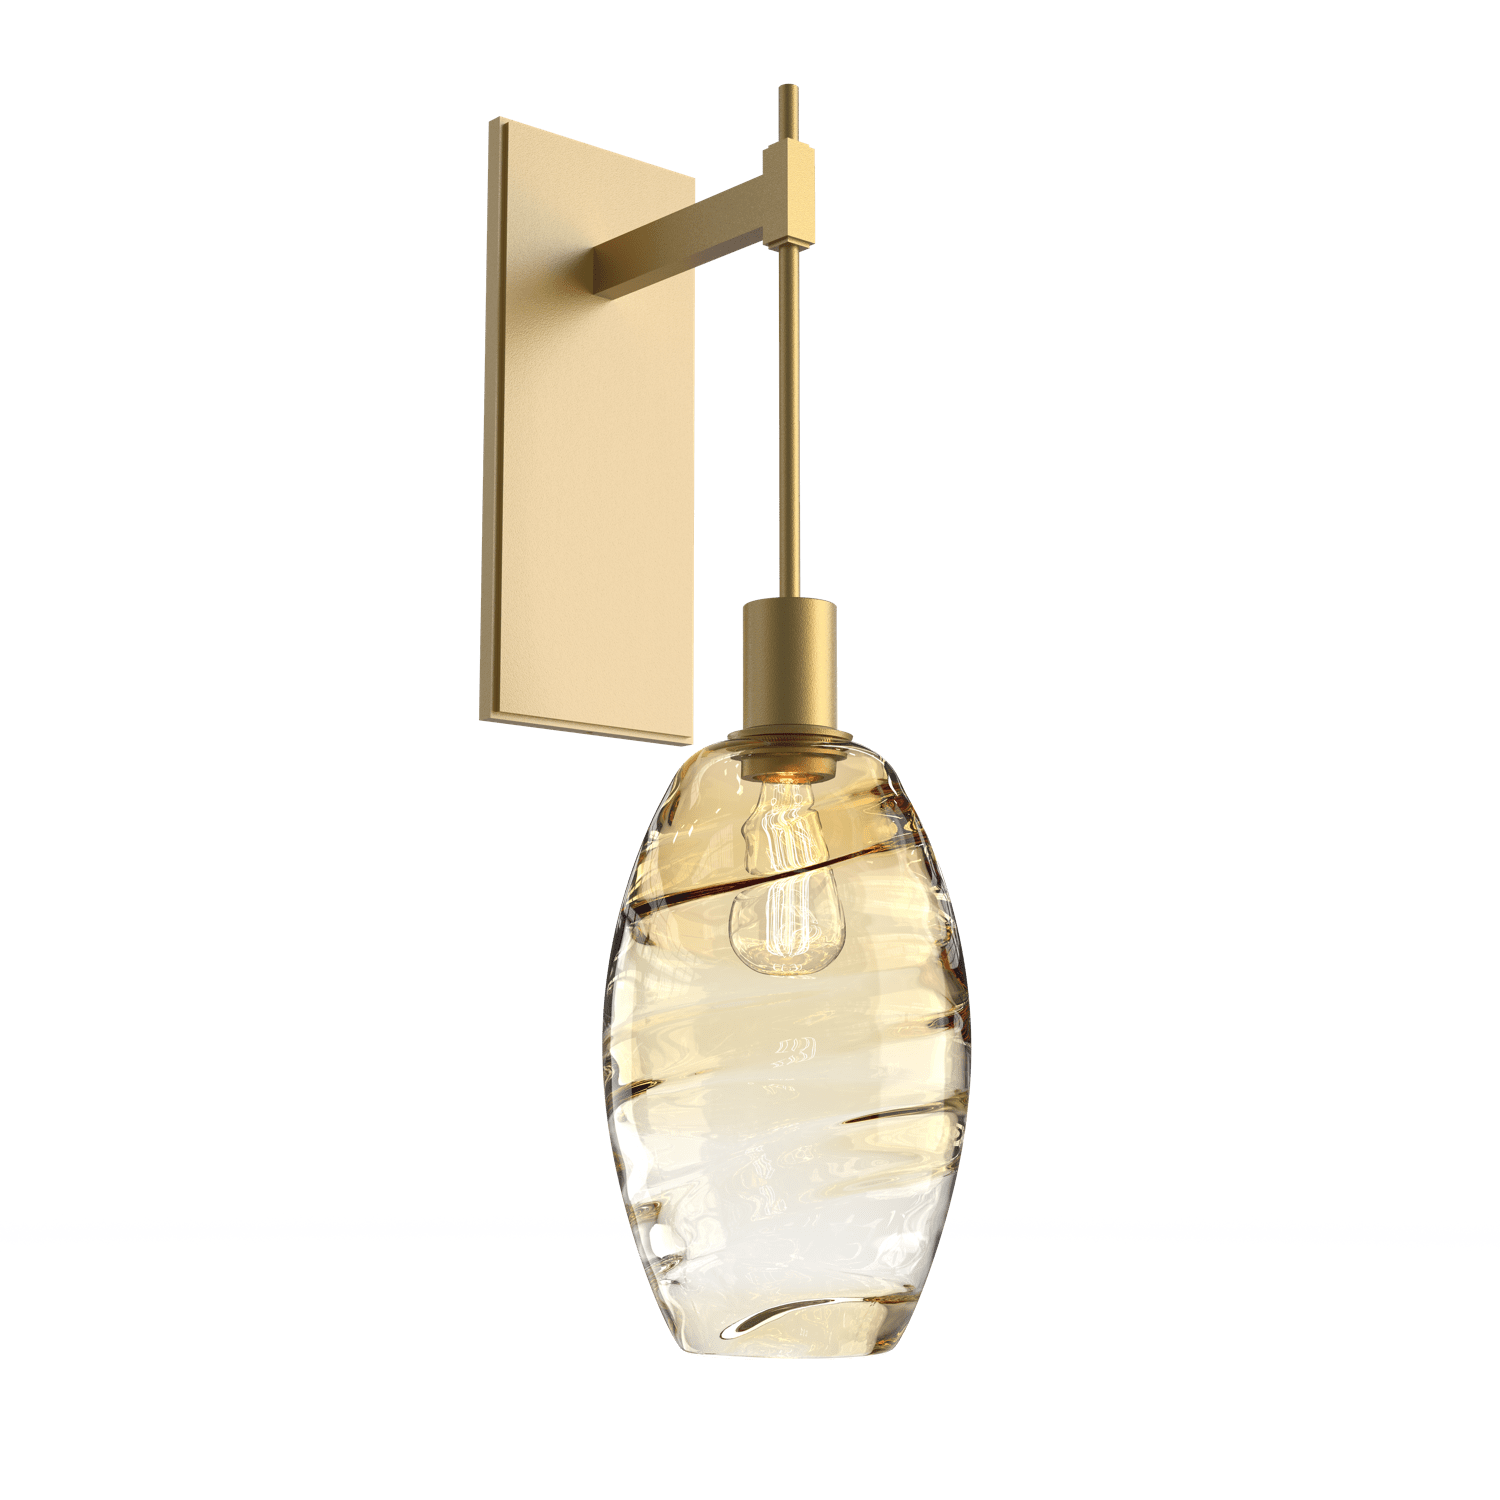 IDB0035-24-GB-OA-Hammerton-Studio-Optic-Blown-Glass-Elisse-tempo-wall-sconce-with-gilded-brass-finish-and-optic-amber-blown-glass-shades-and-incandescent-lamping